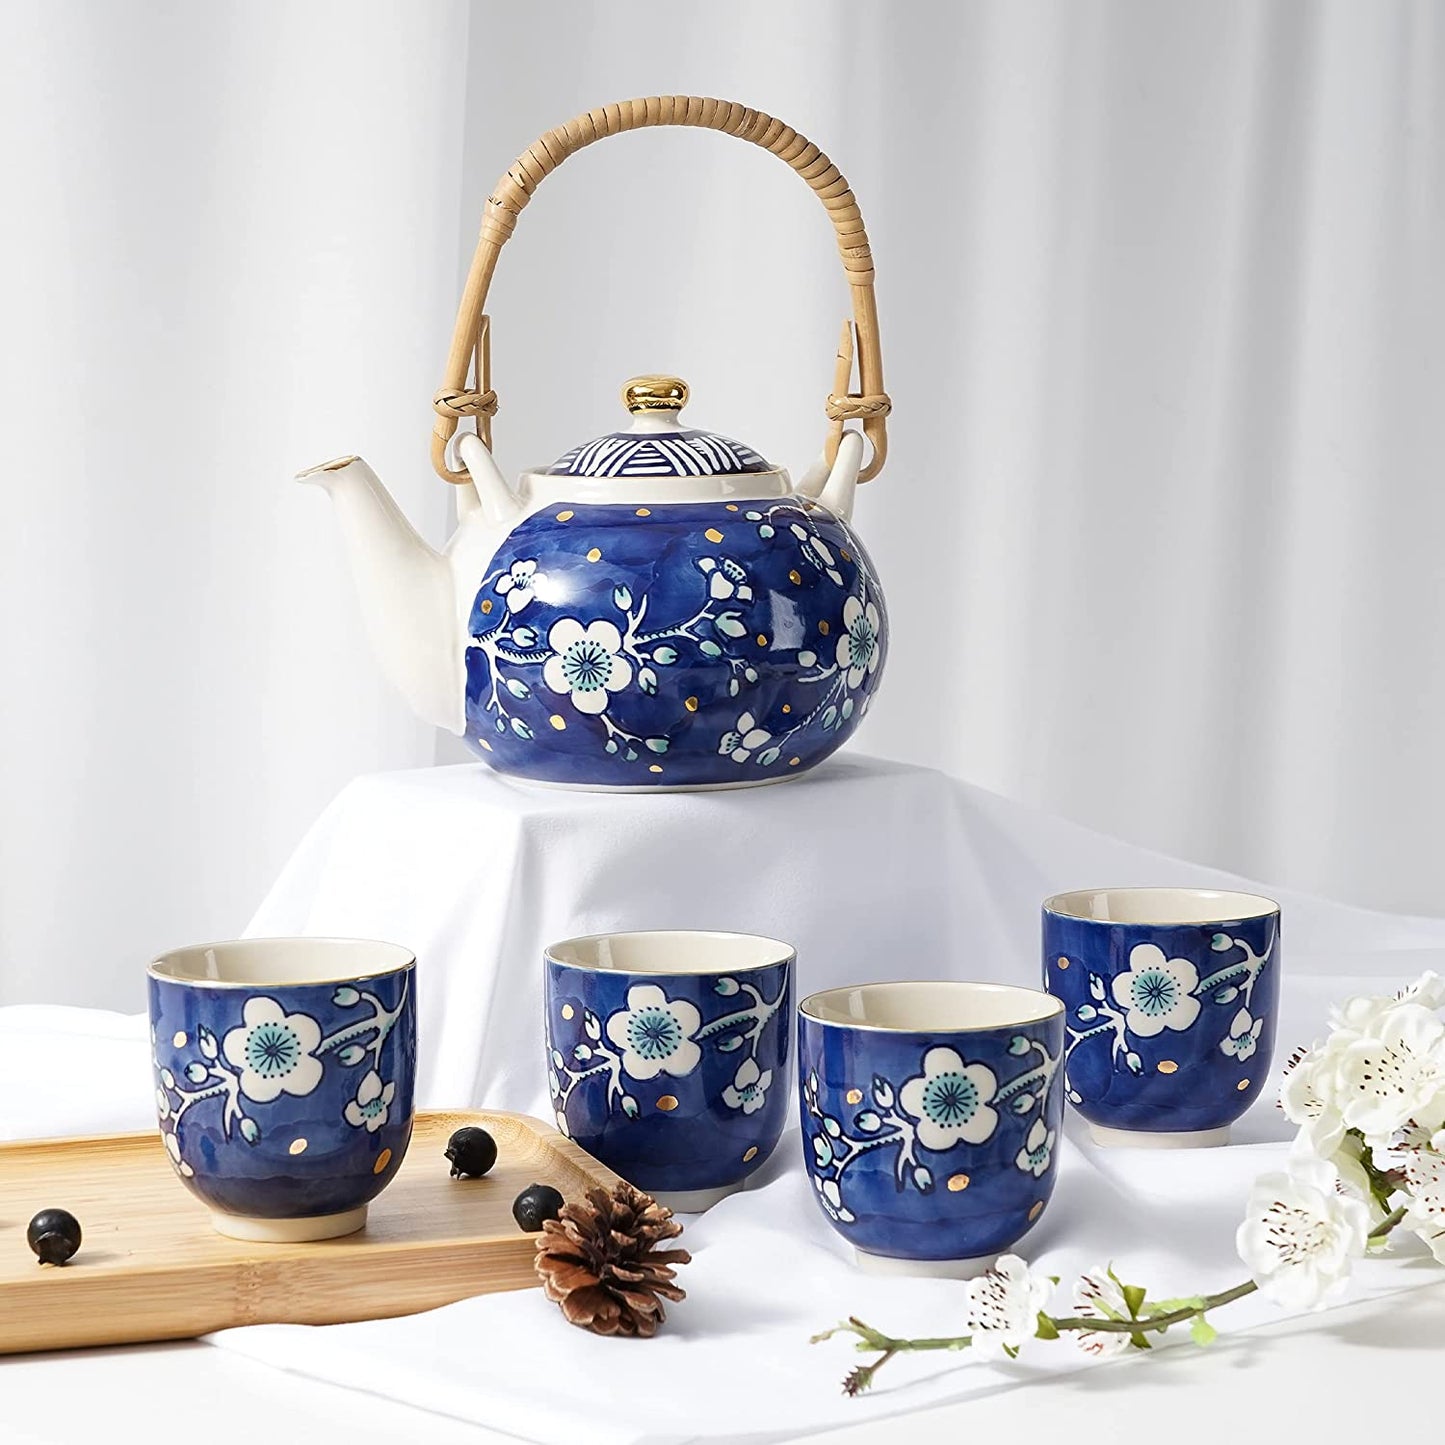 Cobalt Japanese Ceramic Tea Sets with 1 Teapot, 4 Tea Cups, Infuser, Tray